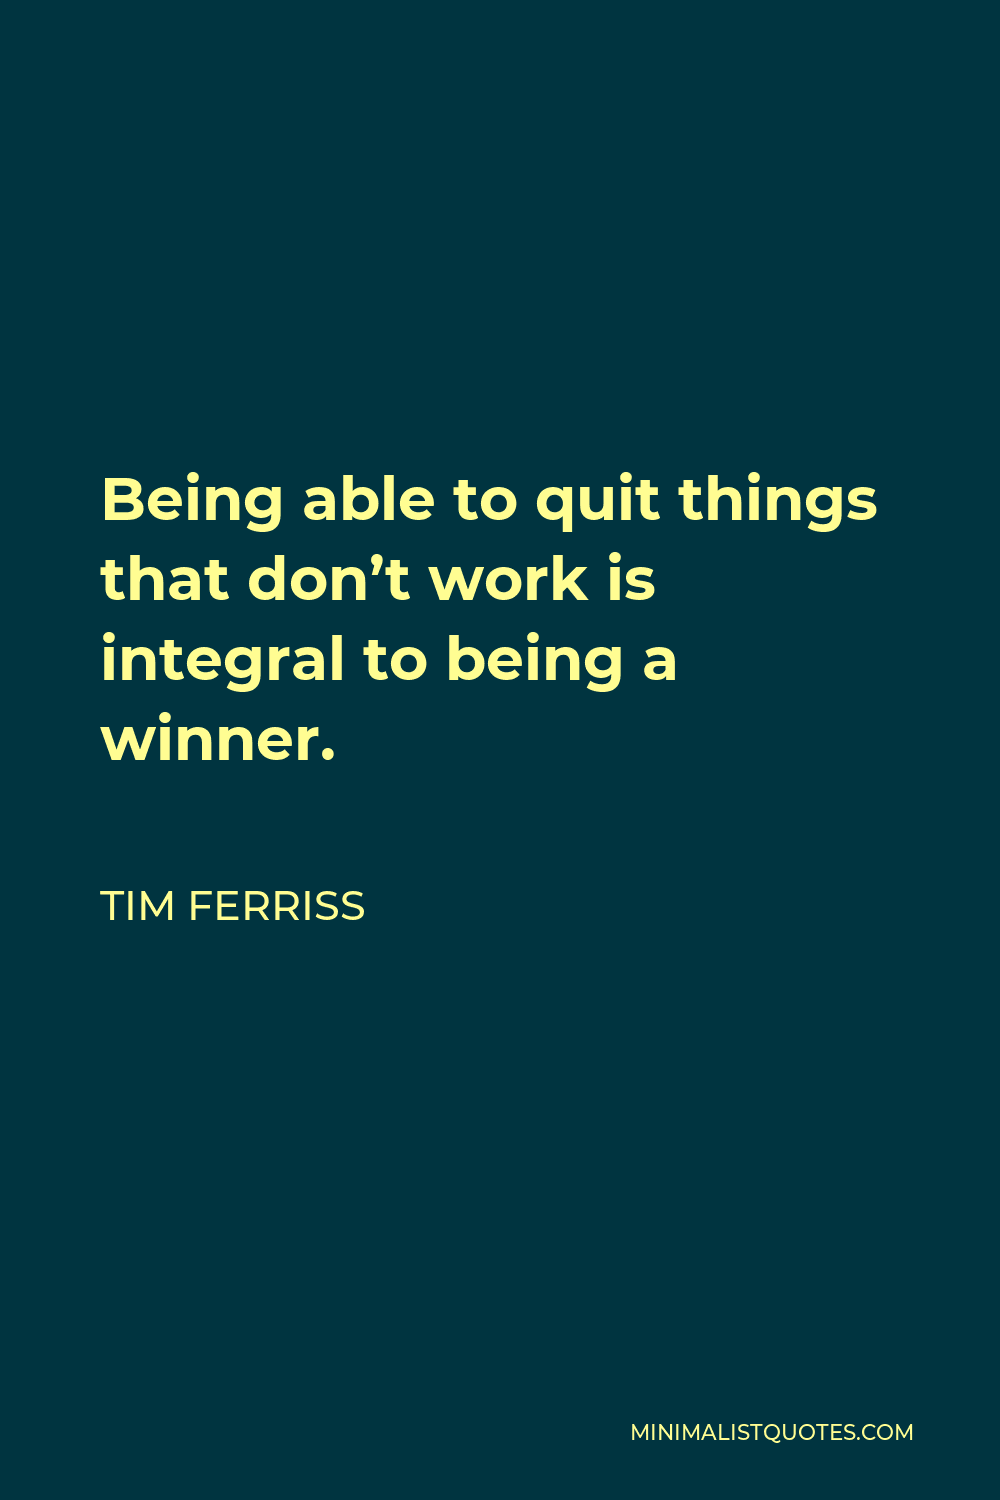 Tim Ferriss Quote - Being able to quit things that don’t work is integral to being a winner.